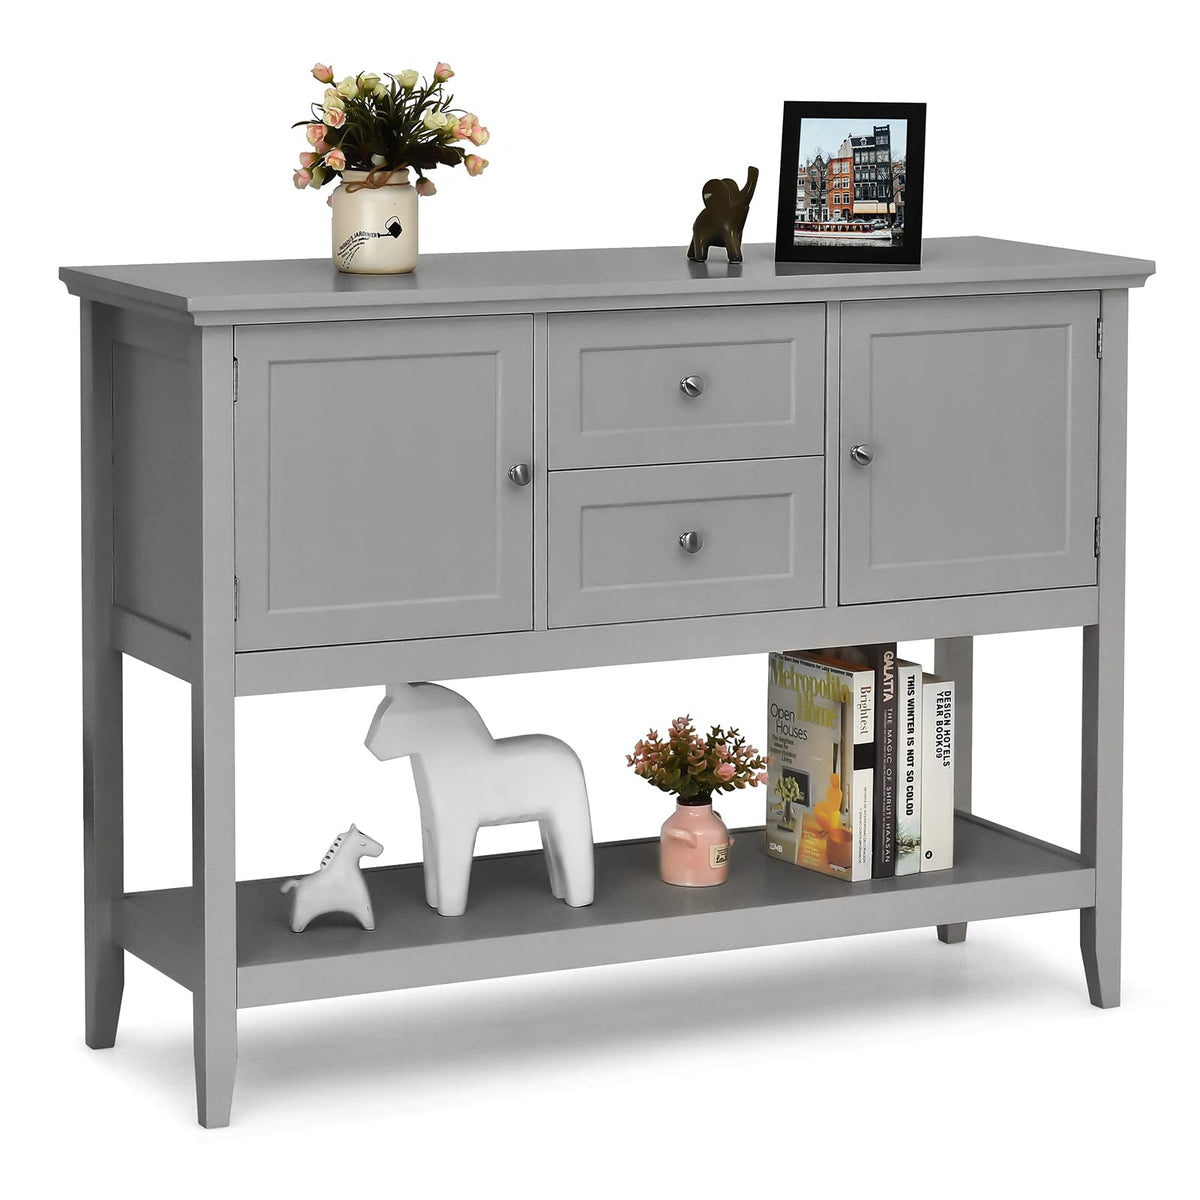 Giantex Buffet Sideboard Cabinet, 2 Drawers & 2 Doors, Side Console Table, Display Desk with Storage Shelf